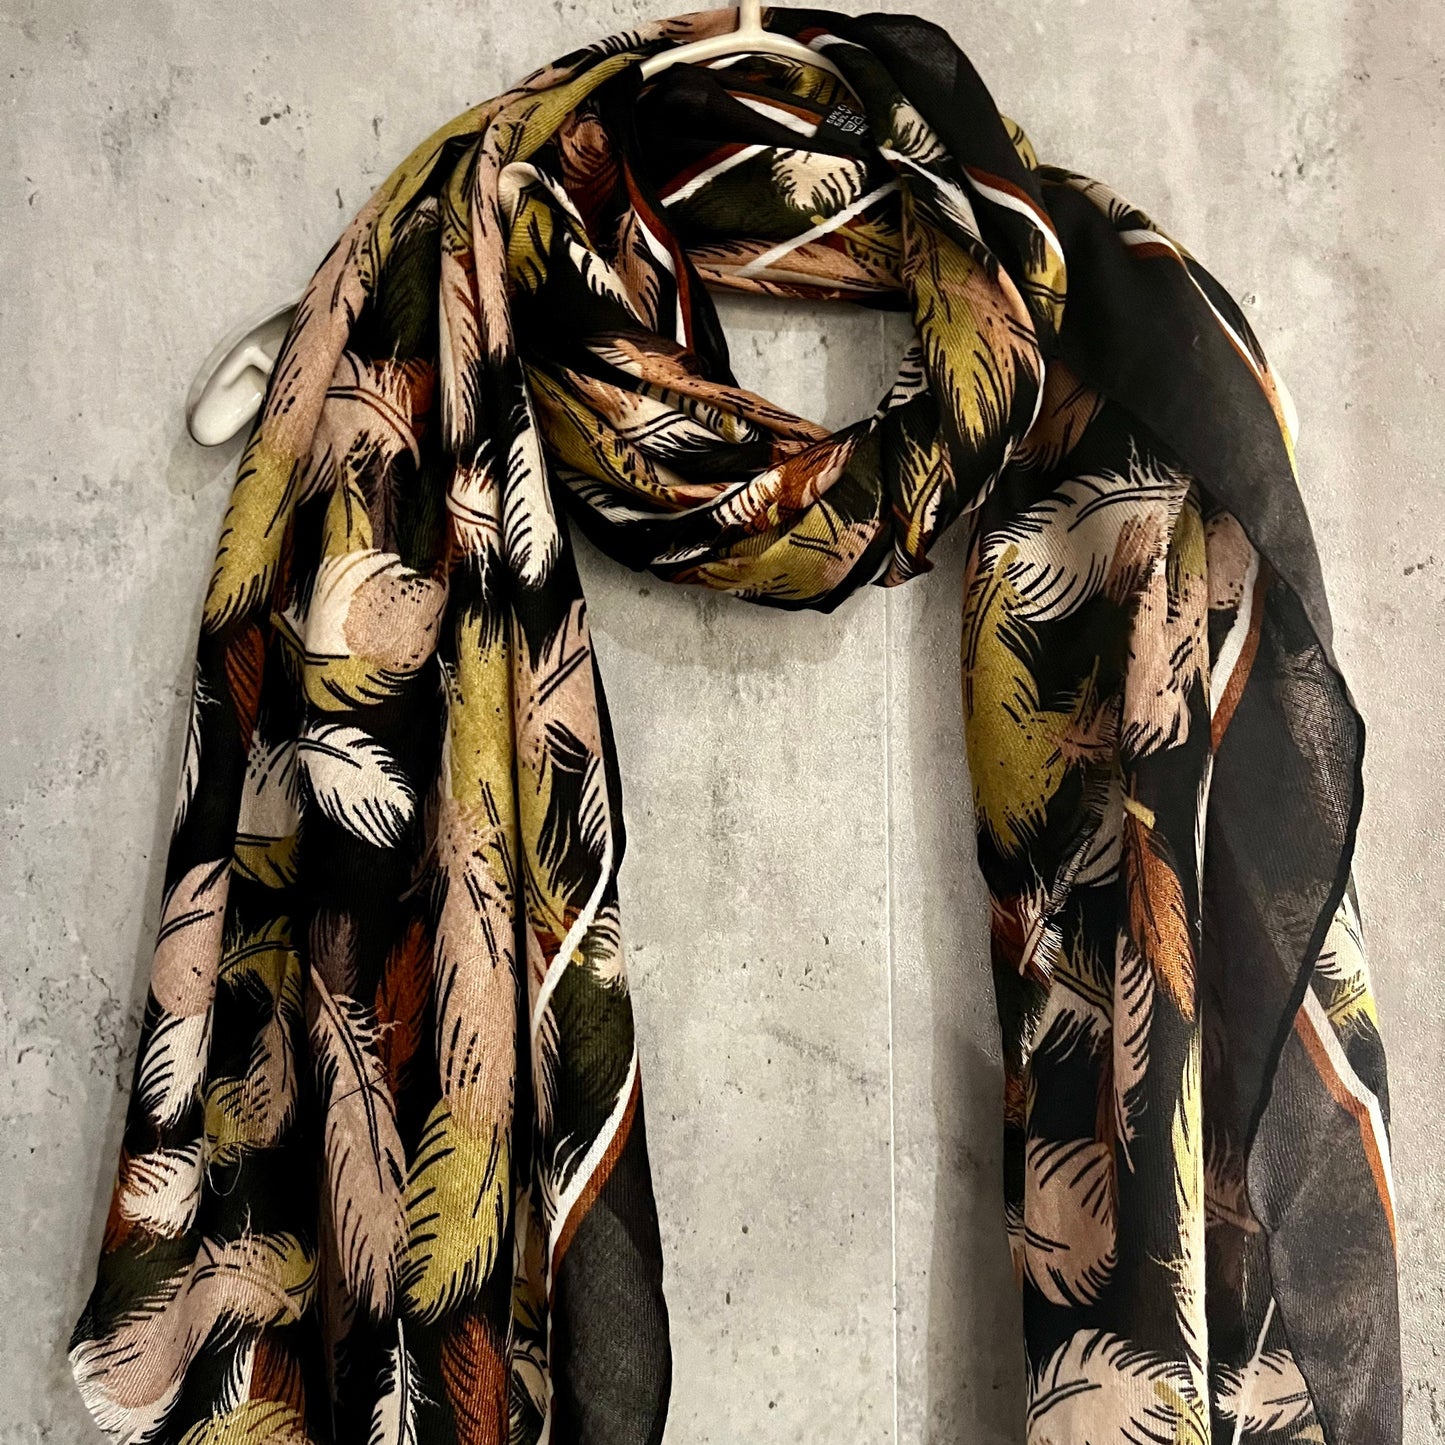 Black Cotton Scarf with Floating Green Beige Feathers – A Stylish and Versatile Gift for Her